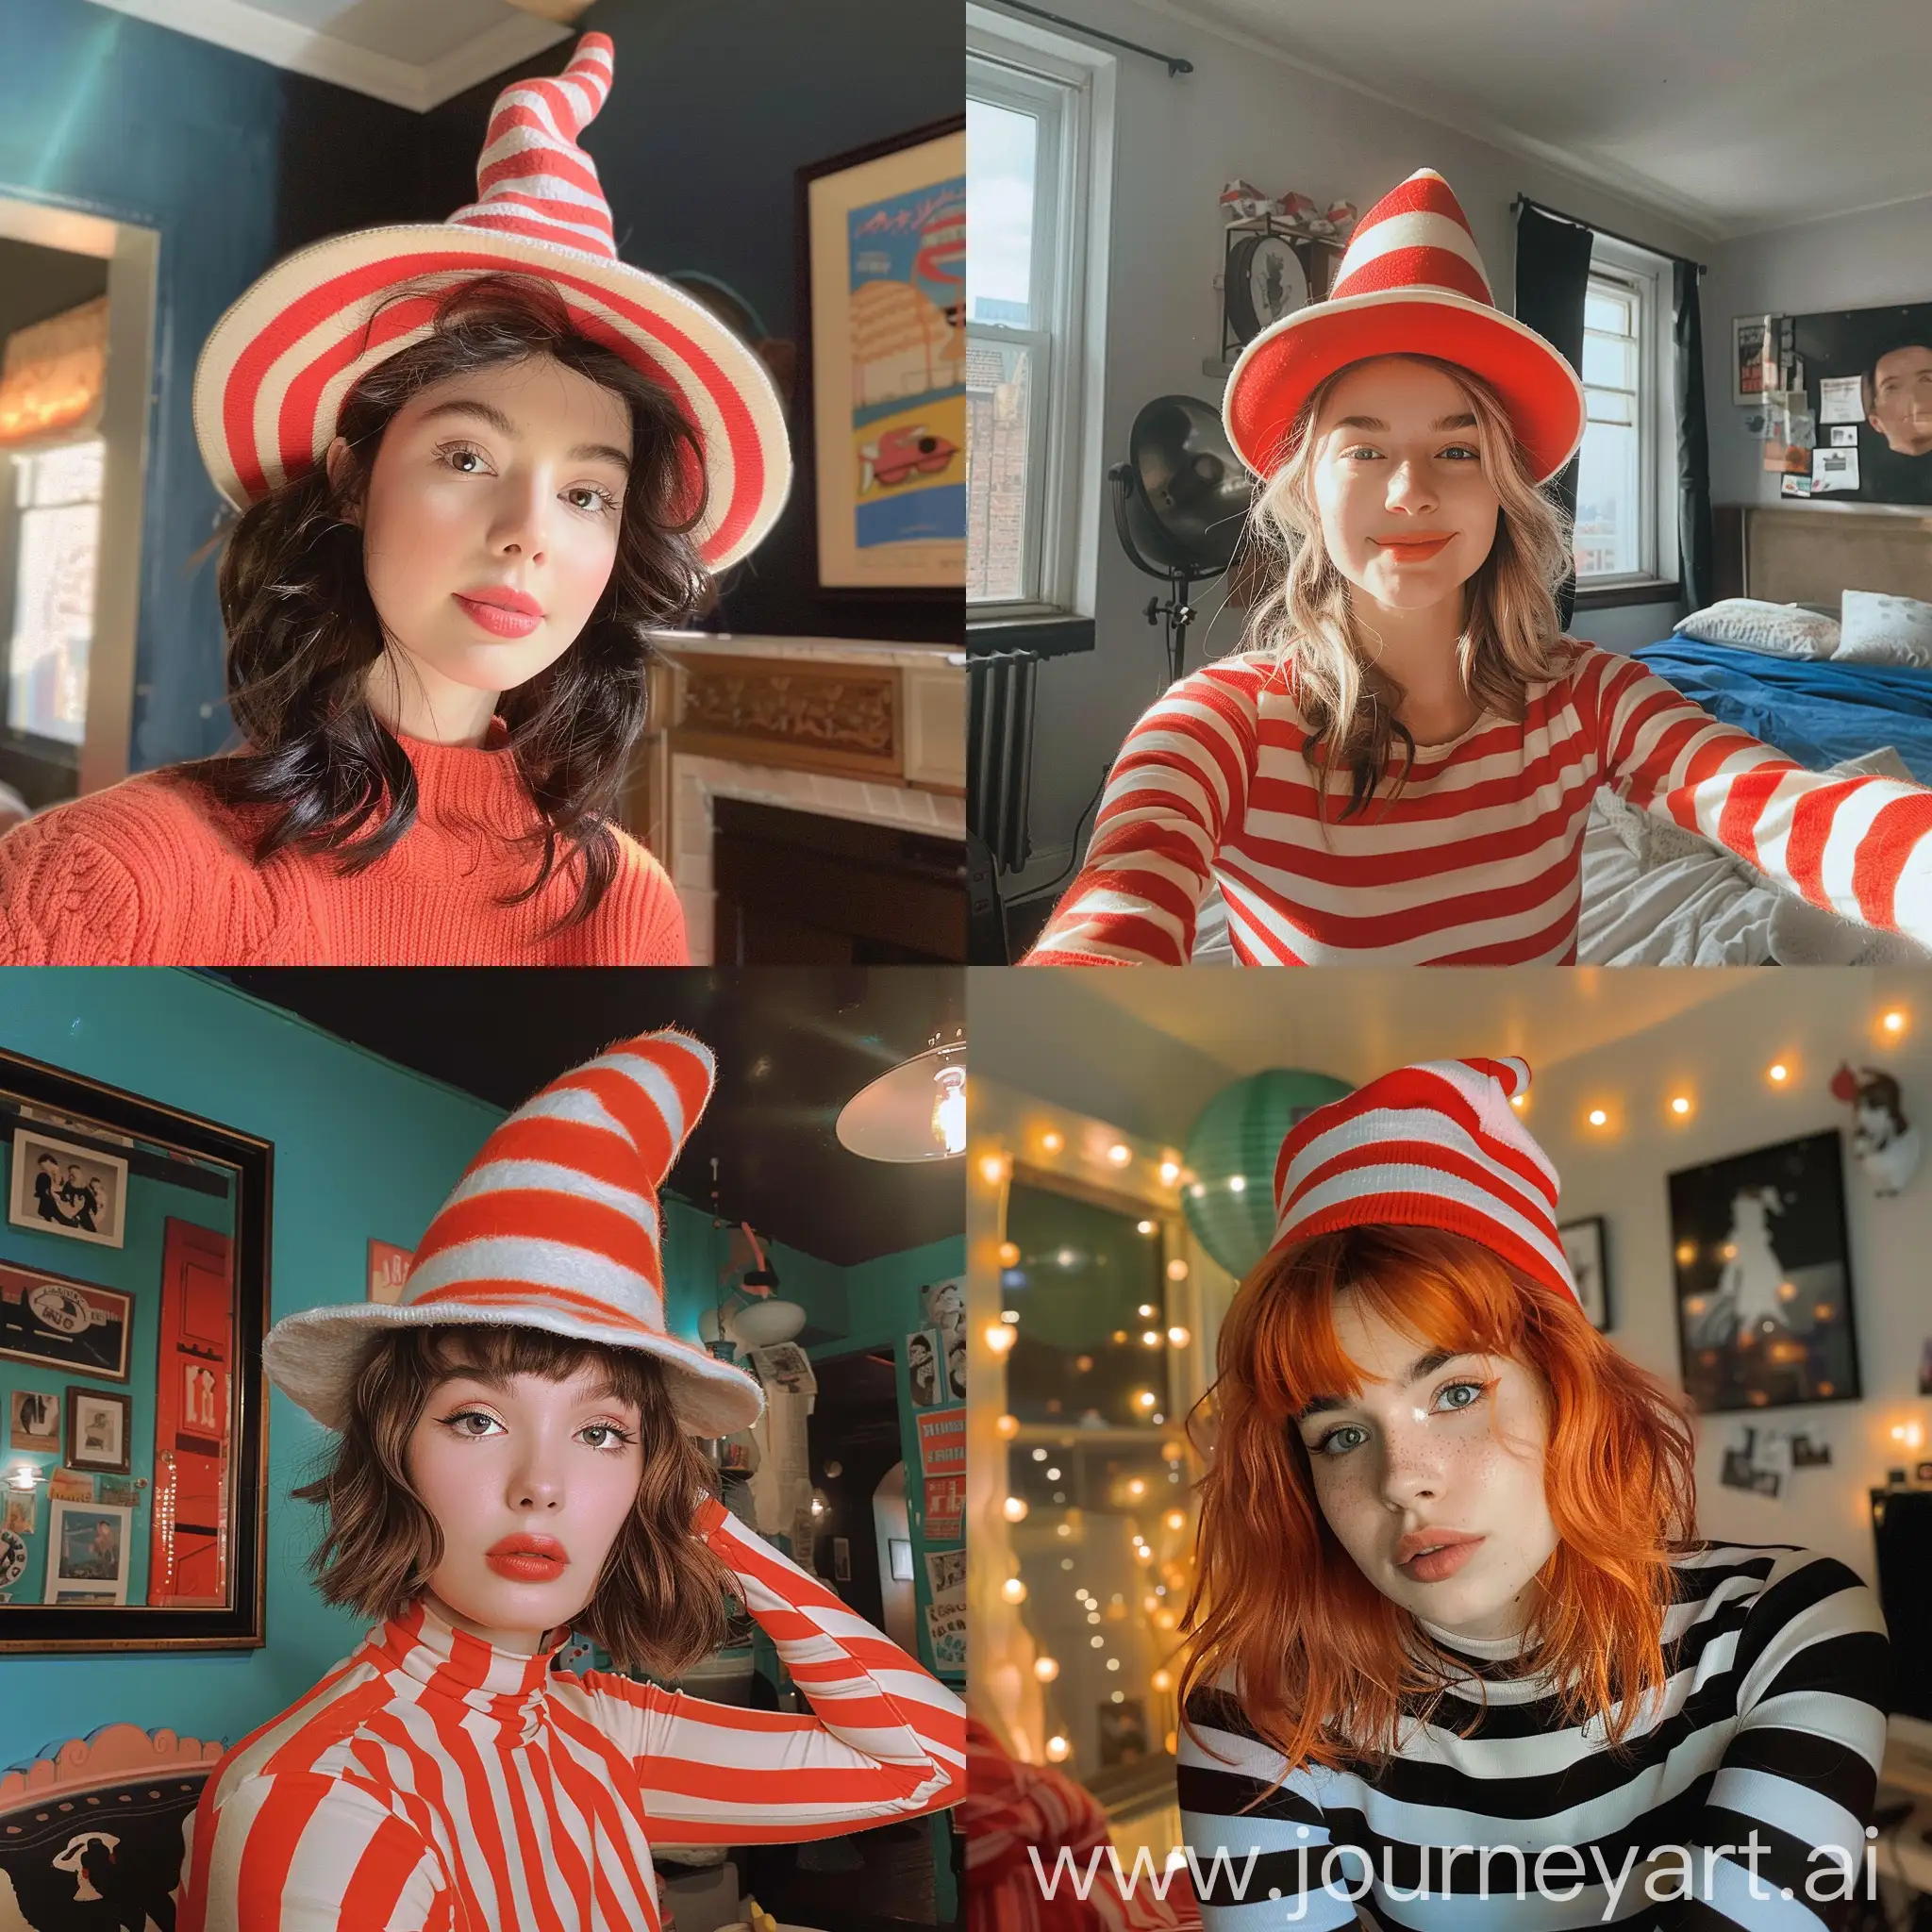 Aesthetic Instagram selfie of Sally from the Cat in the Hat movie, adorable, girl, cute, NYC apartment 